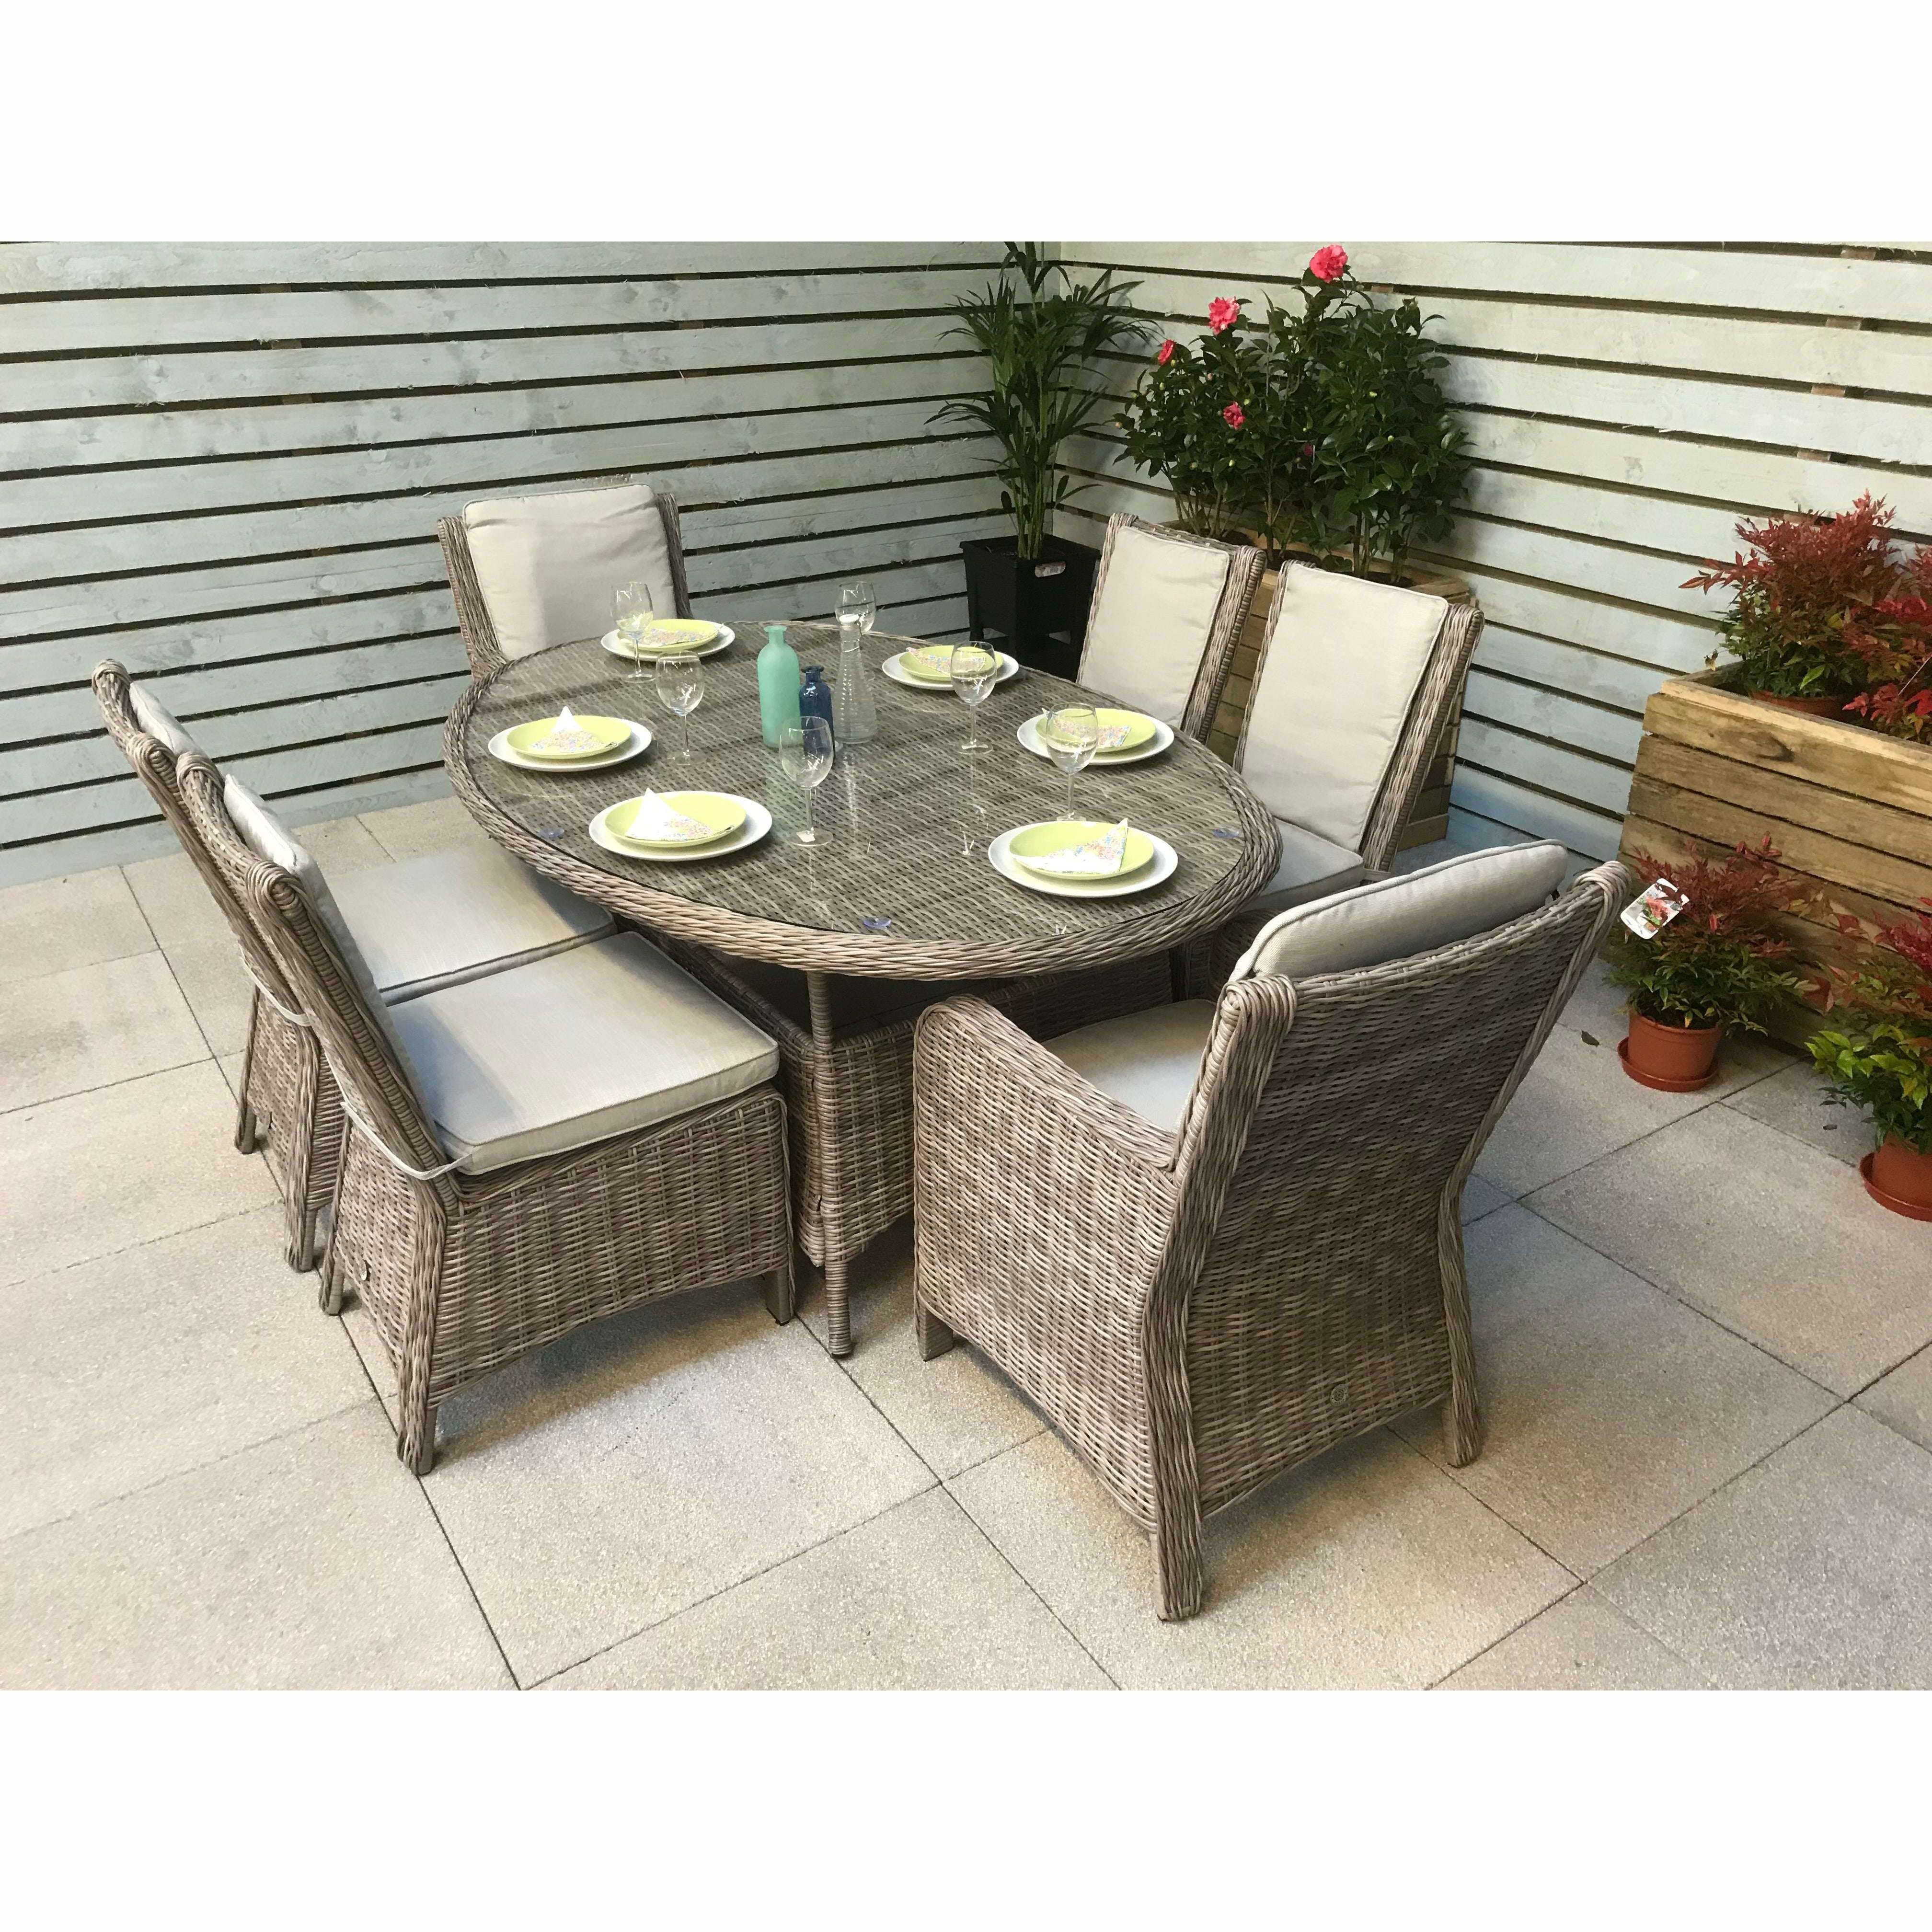 Exceptional Garden:Signature Weave Alexandra 6-Seater Dining Set with Oval Dining Table